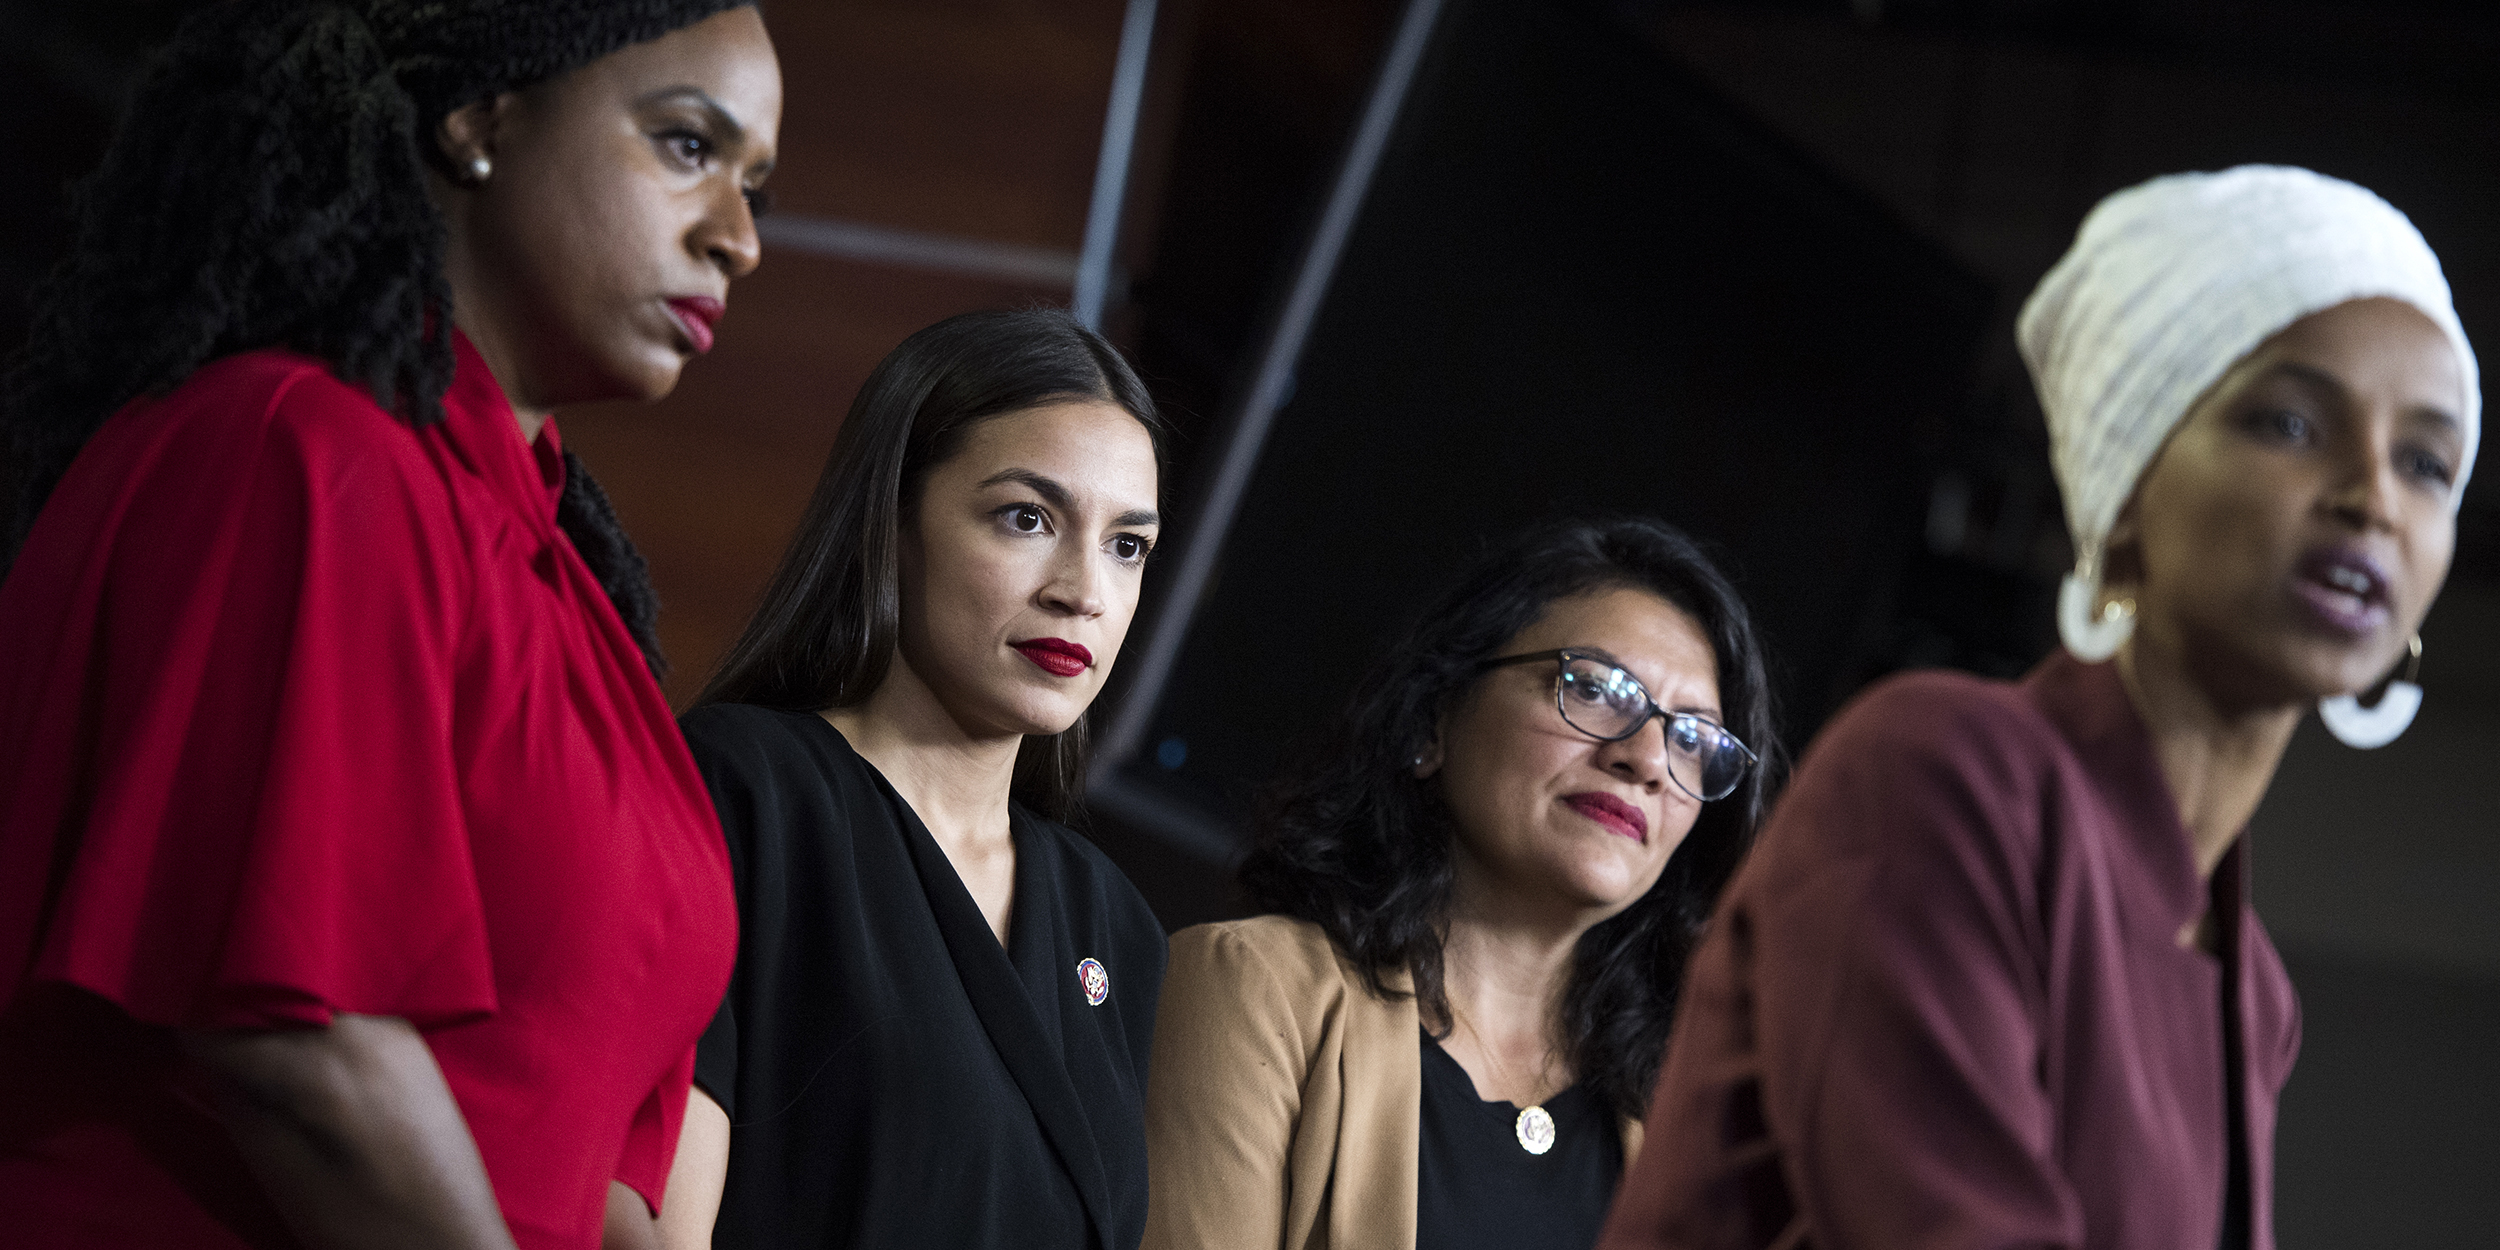 UNITED STATES - JULY 15: From left, Reps. Ayanna Pressley, D-Mass.,  Alexandria Ocasio-Cortez, D-N.Y., Rashida Tlaib, D-Mass., and Ilhan Omar, D-Minn., conduct a news conference in the Capitol Visitor Center responding to negative comments by President Trump that were directed the freshman House Democrats on Monday, July 15, 2019. (Photo By Tom Williams/CQ Roll Call)